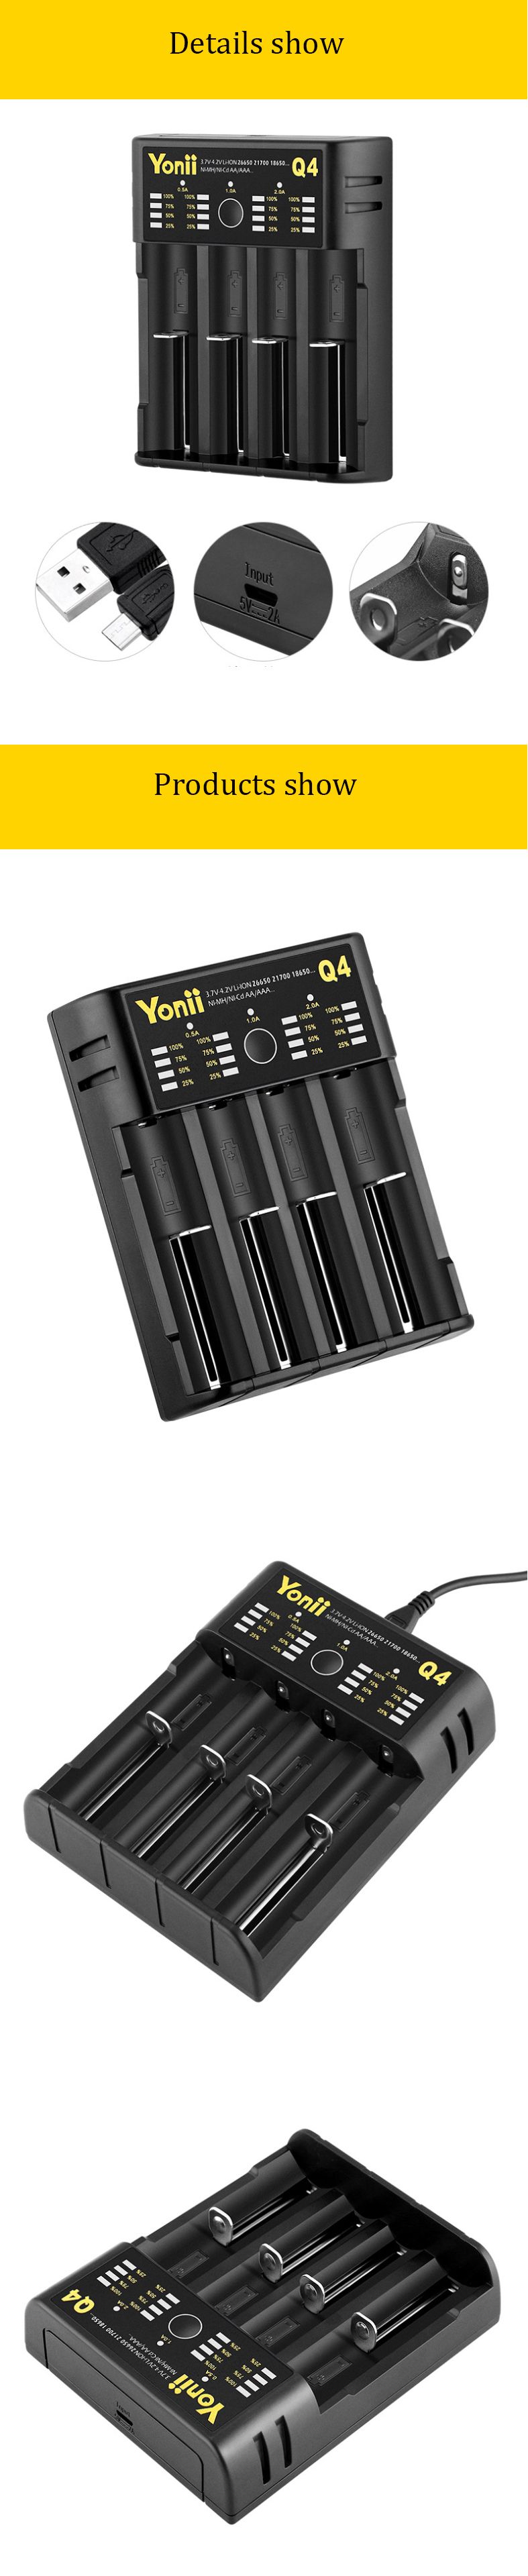 Yonii-Q4-Four-Slot-USB-Rechargeable-Lithium-Battery-Charger-Multi-functional-Intelligent-Charger-for-1552014